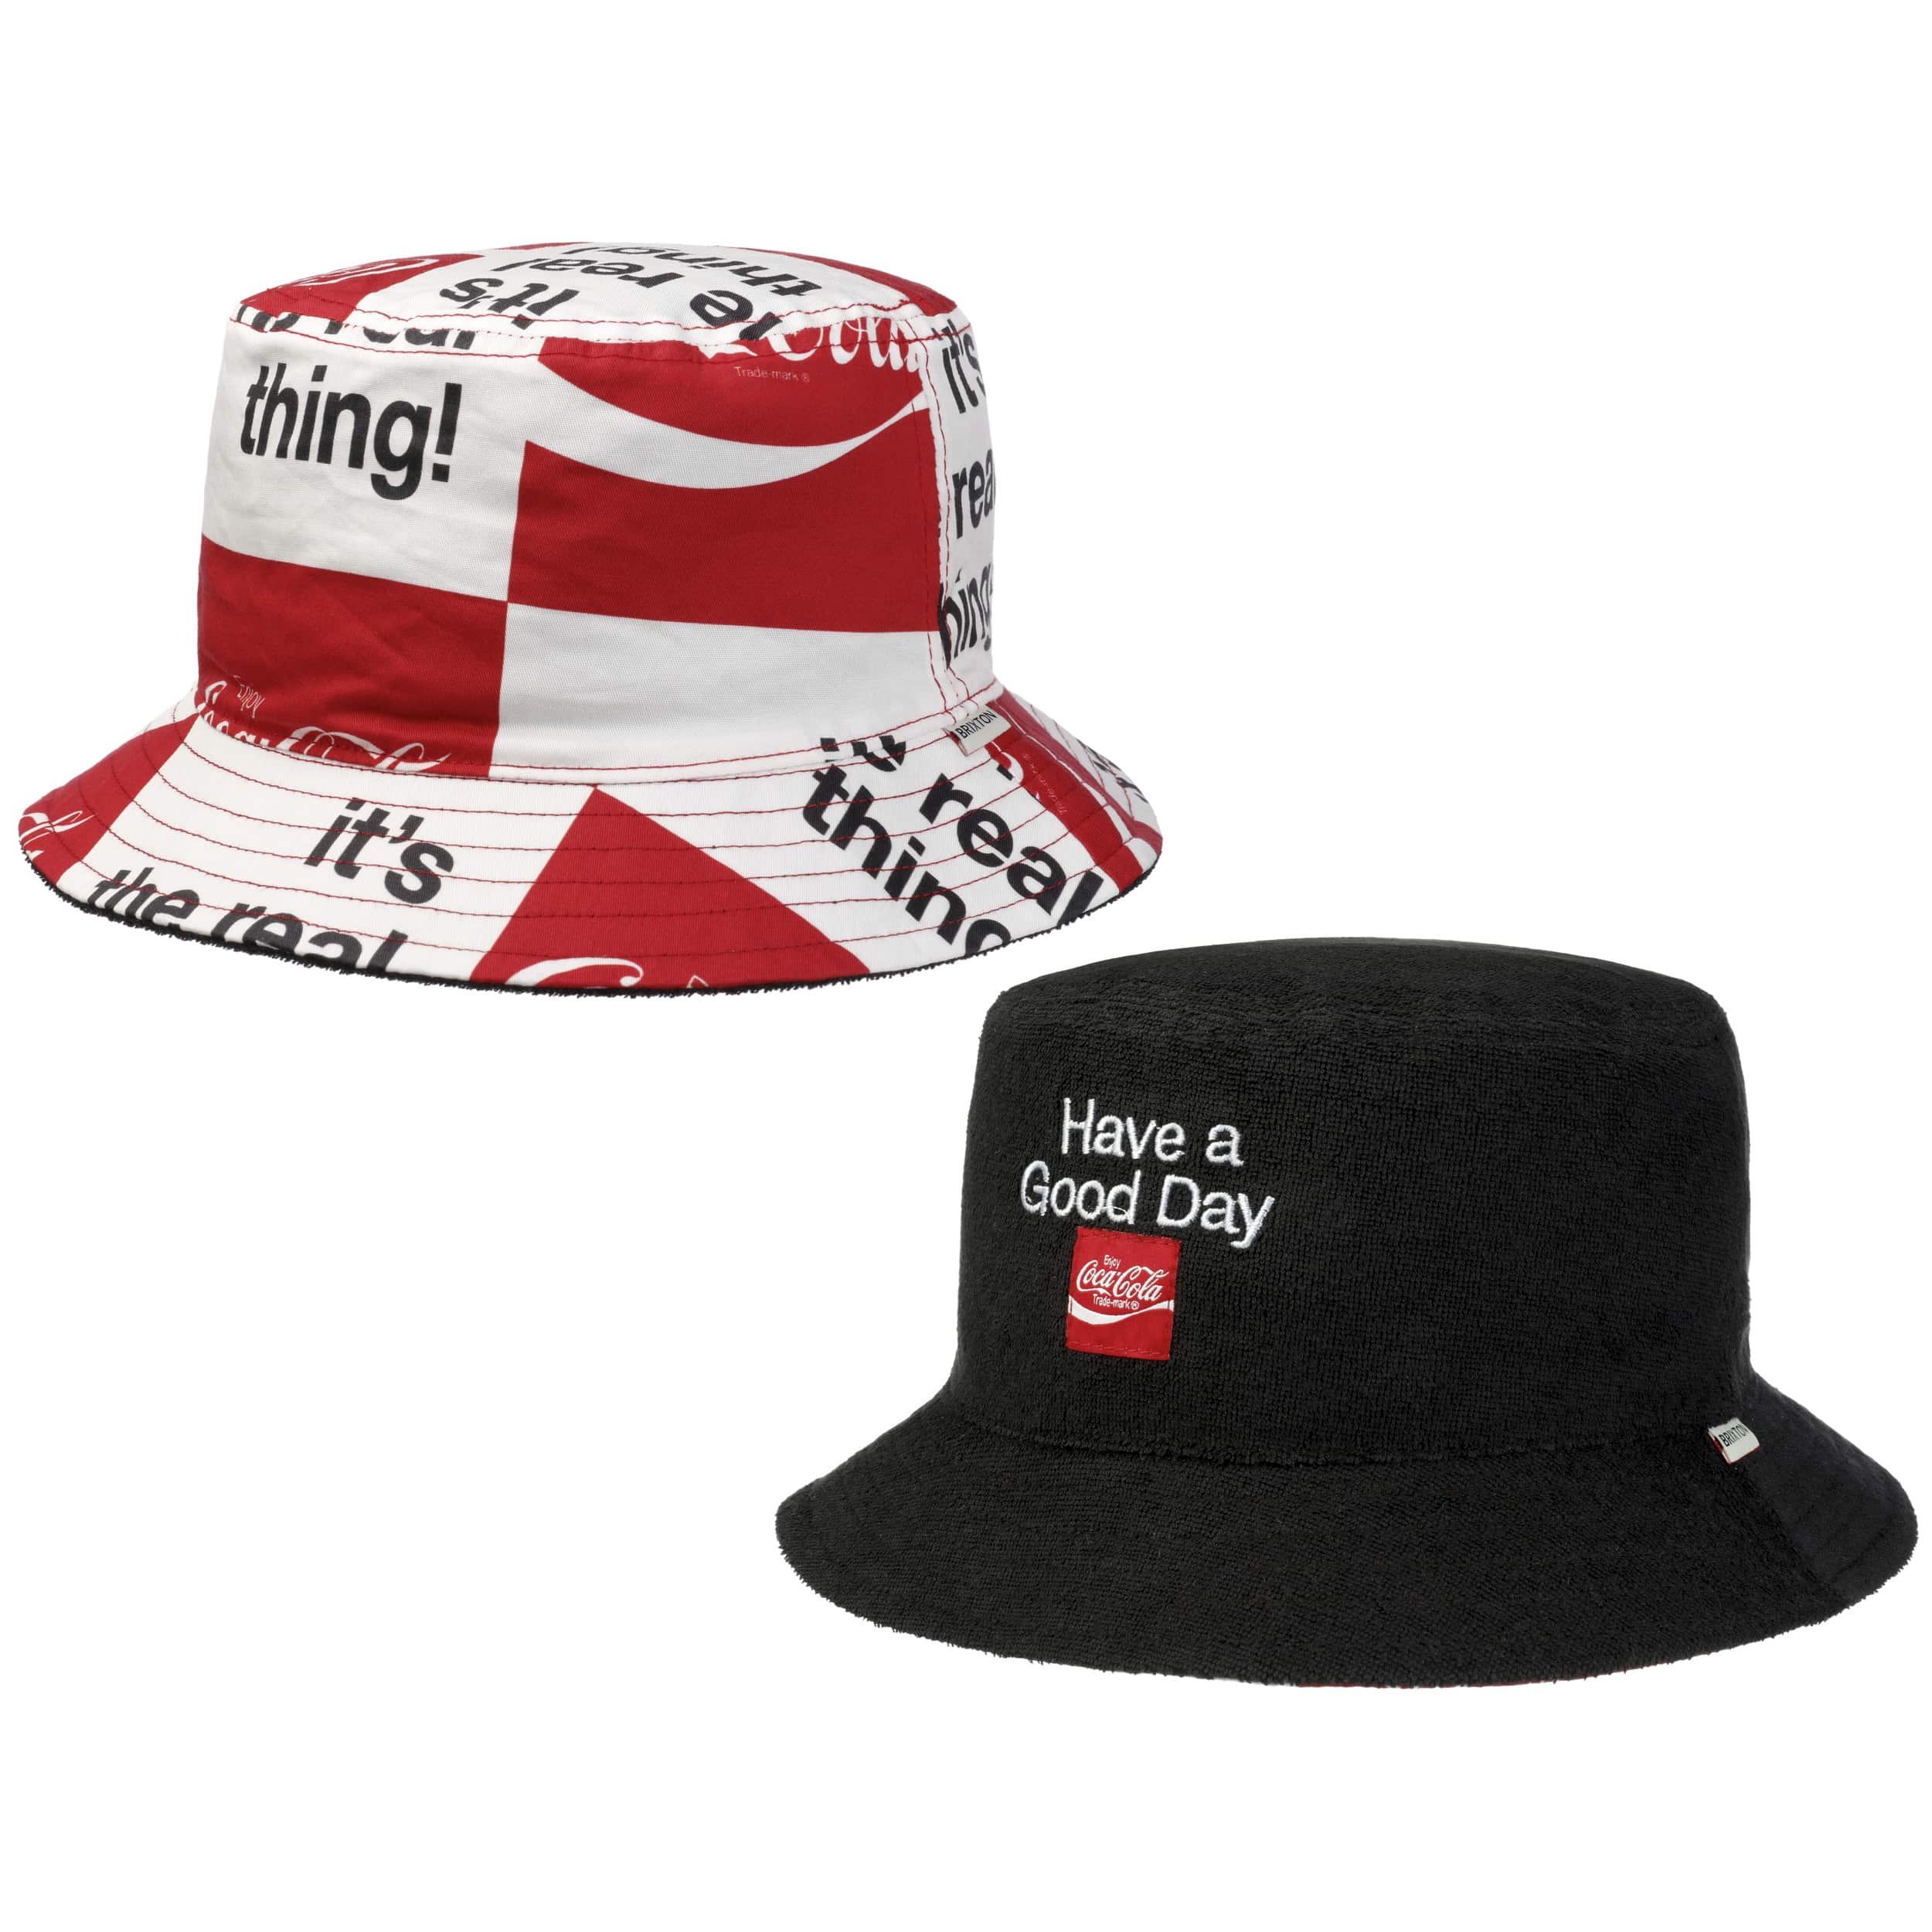 - Coca-Cola Reversible Brixton Day 62,95 Hat Good € by